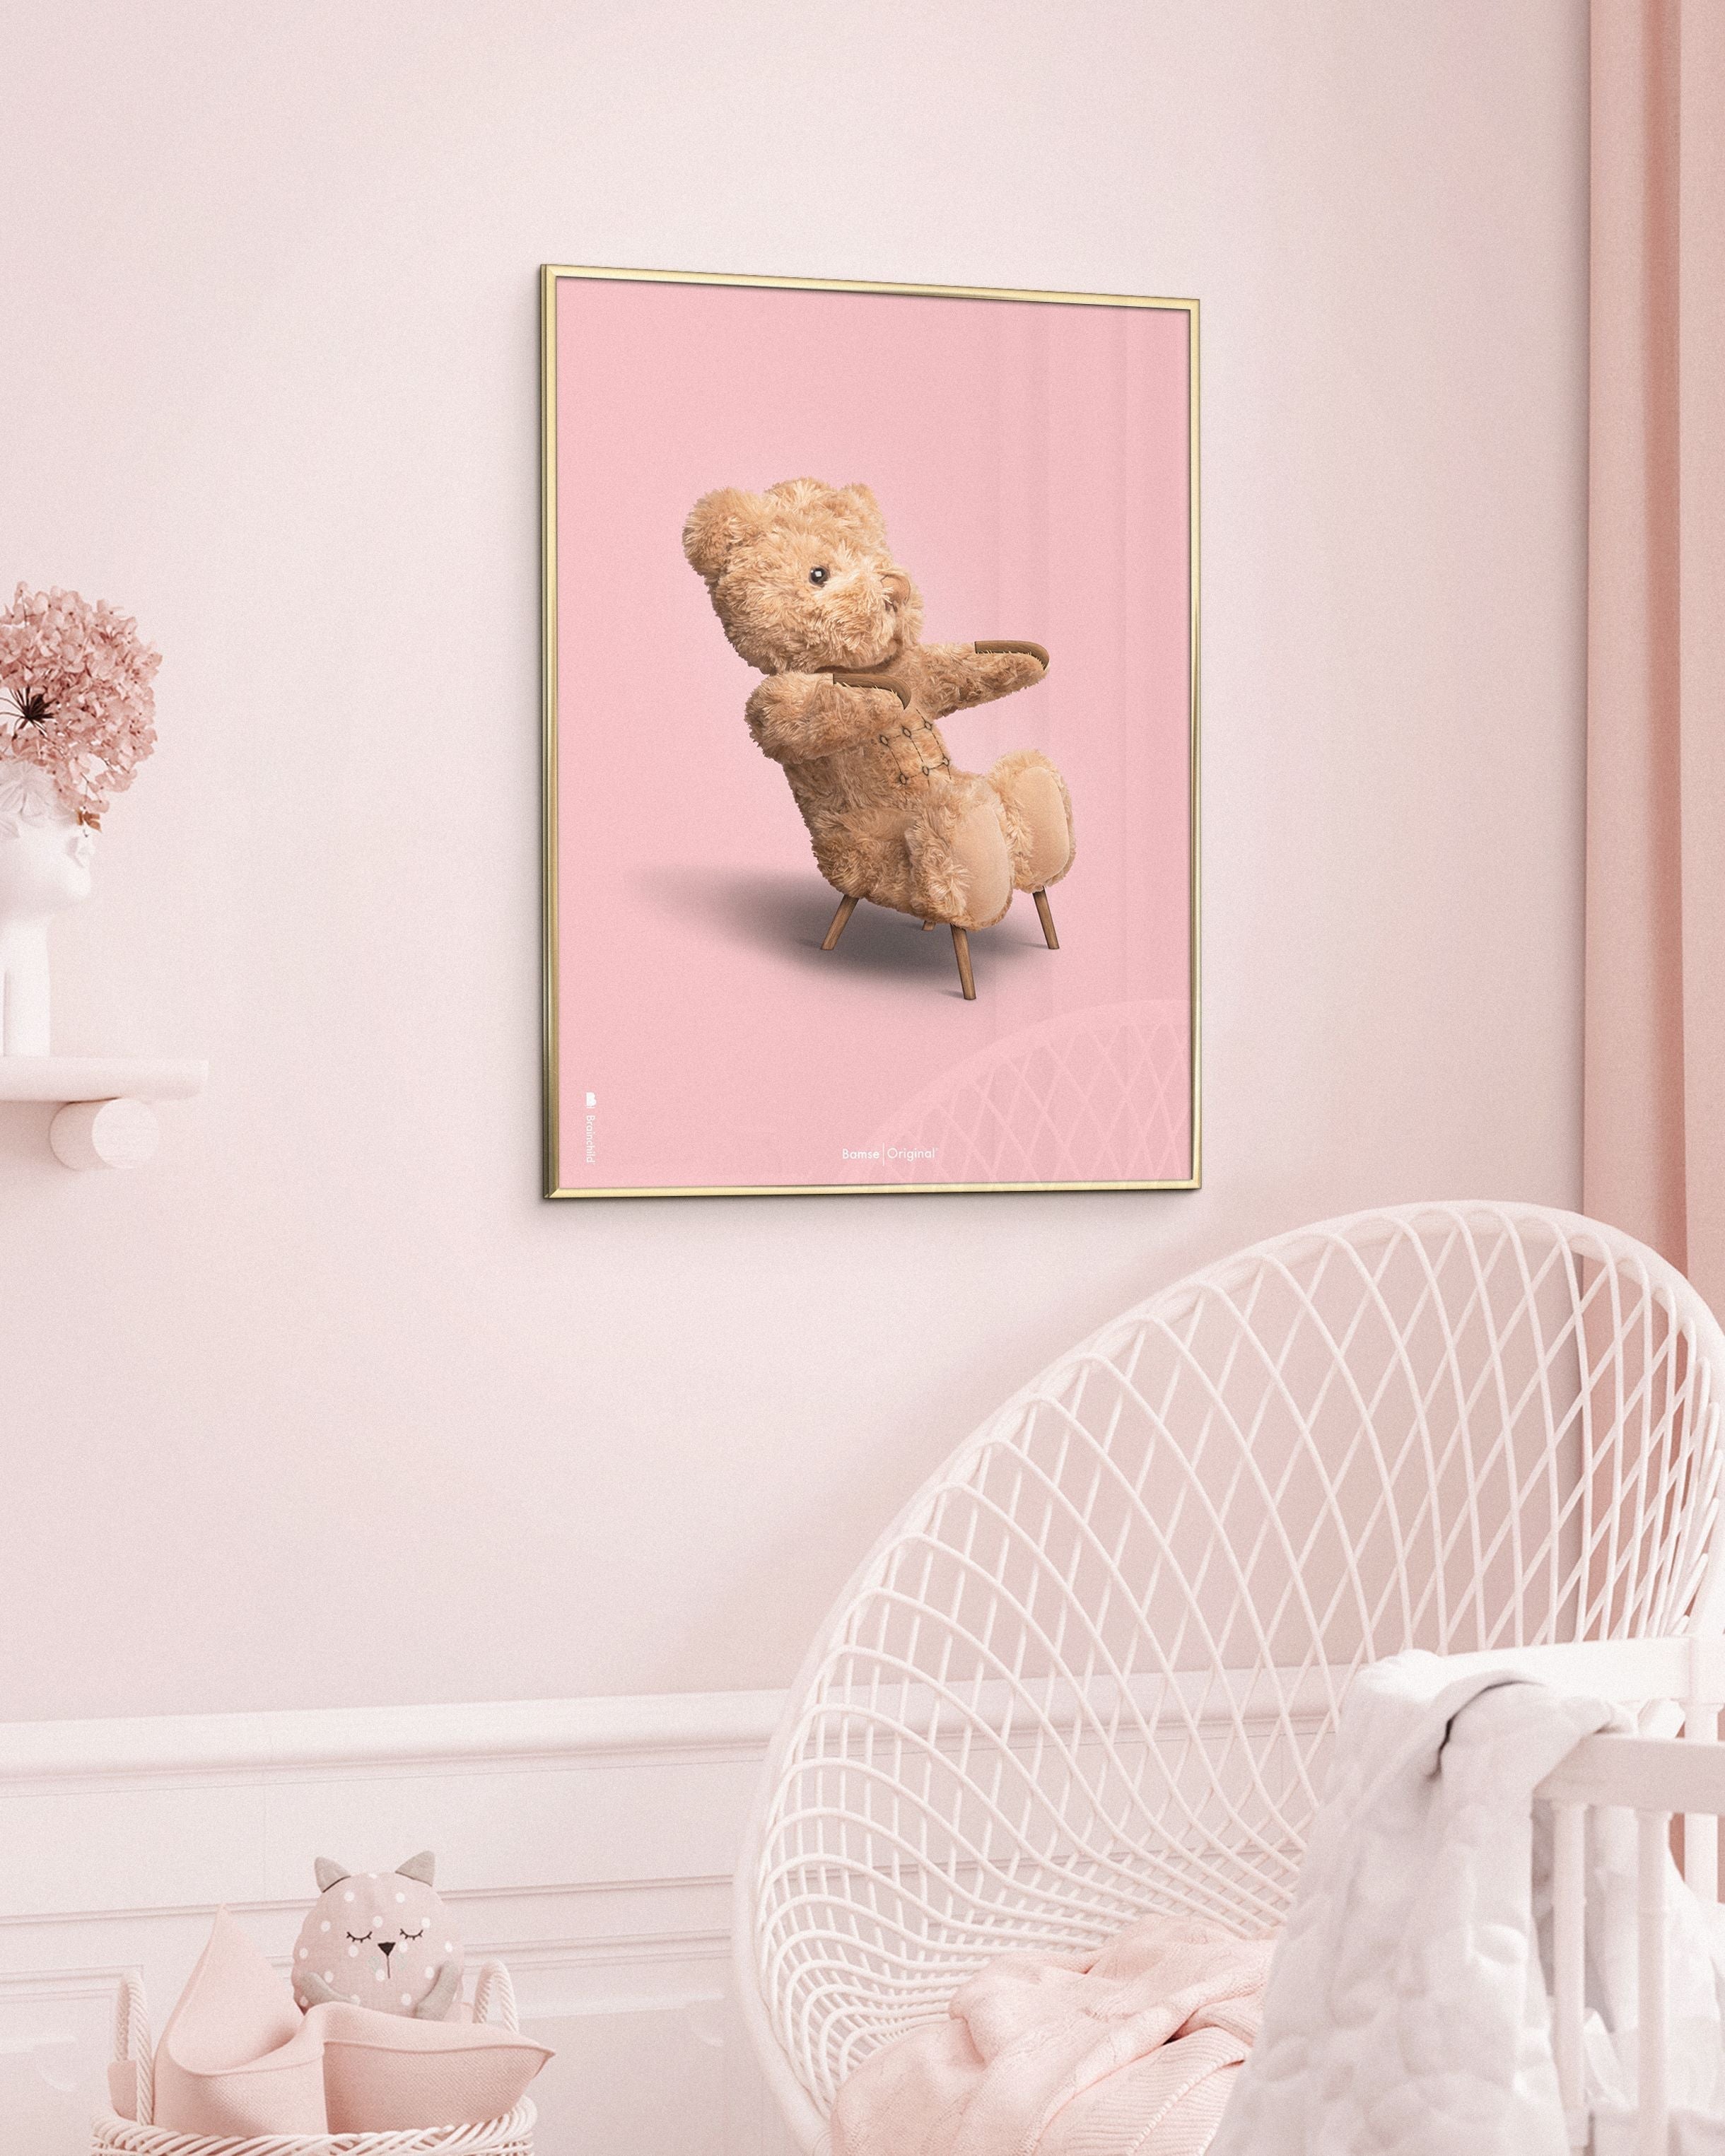 Brainchild Teddy Bear Classic Poster Frame Made Of Light Wood Ramme 50x70 Cm, Pink Background